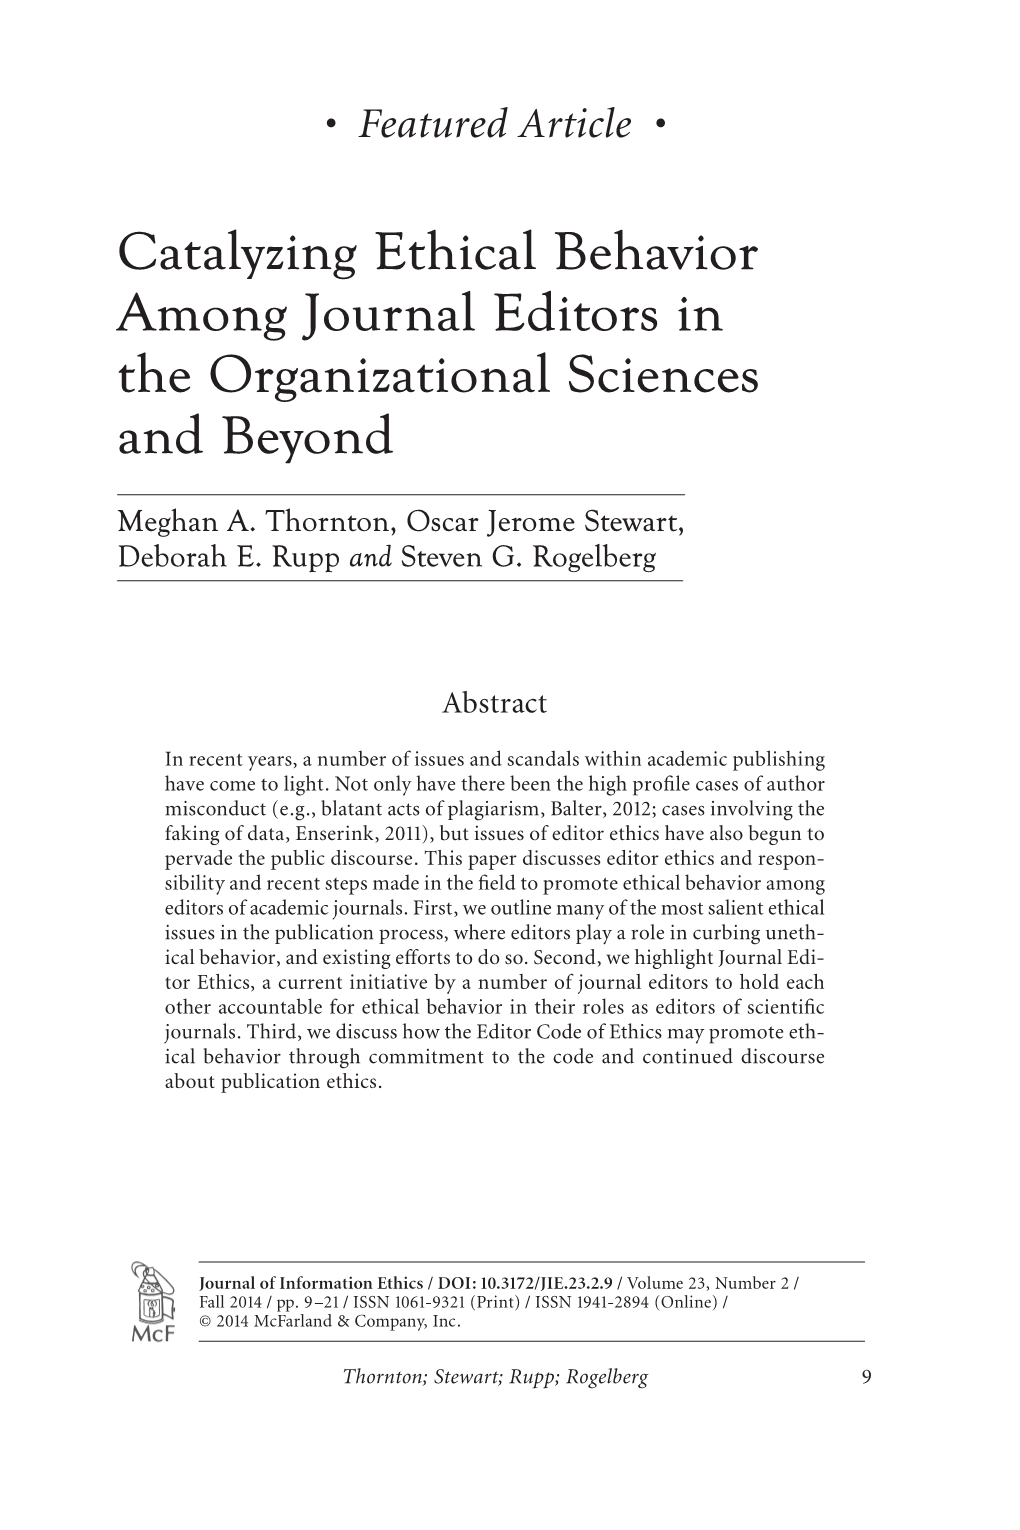 Catalyzing Ethical Behavior Among Journal Editors in the Organizational Sciences and Beyond